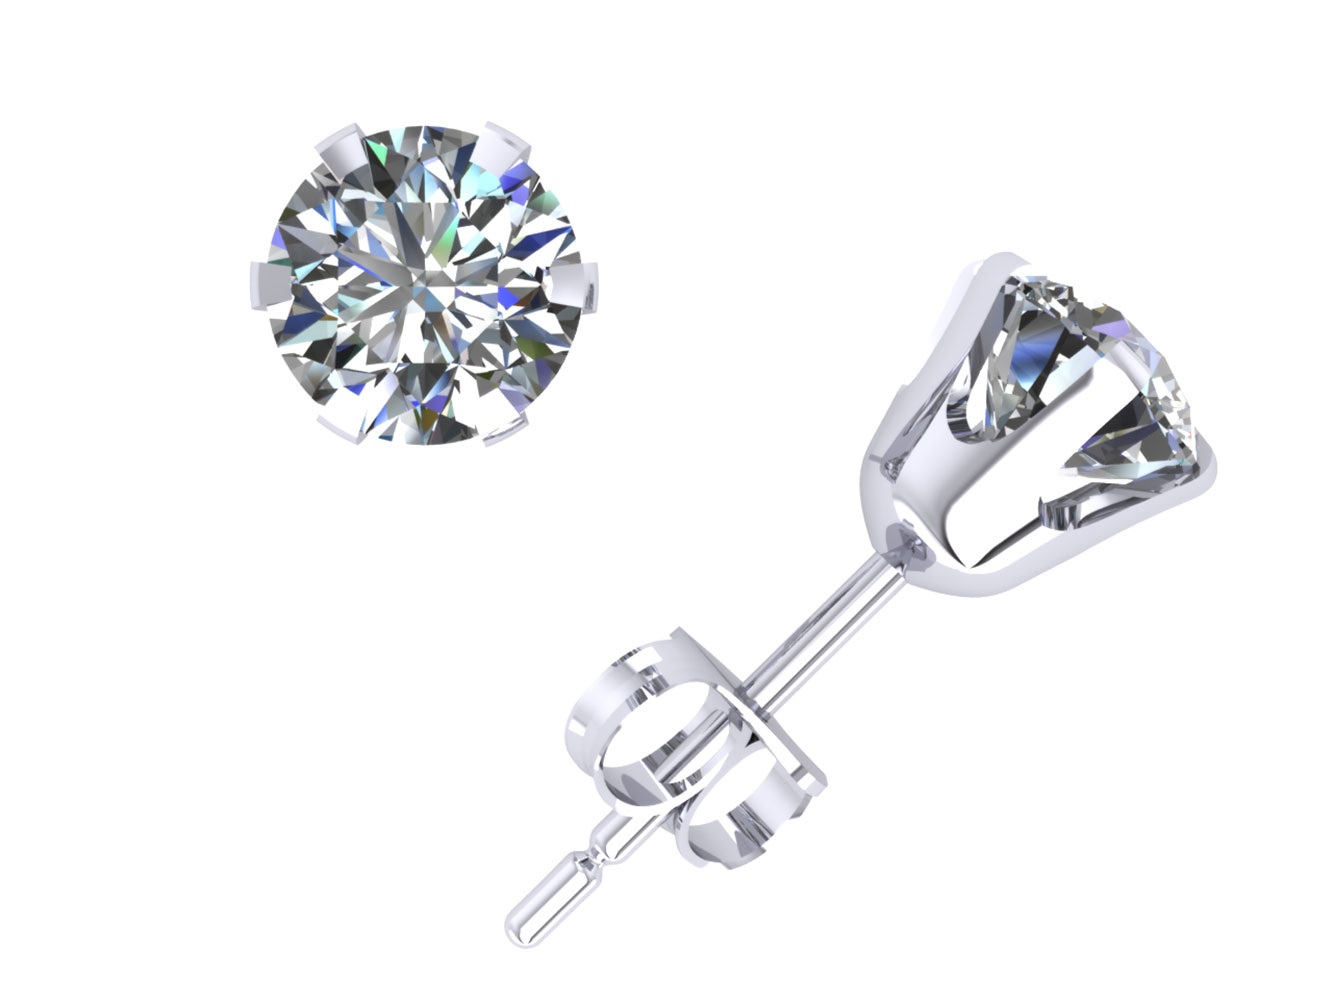 Jewel We Sell Genuine 1Ct Round Diamond Stud Earrings 18Kt White or Yellow Gold Prong Push Back G SI1